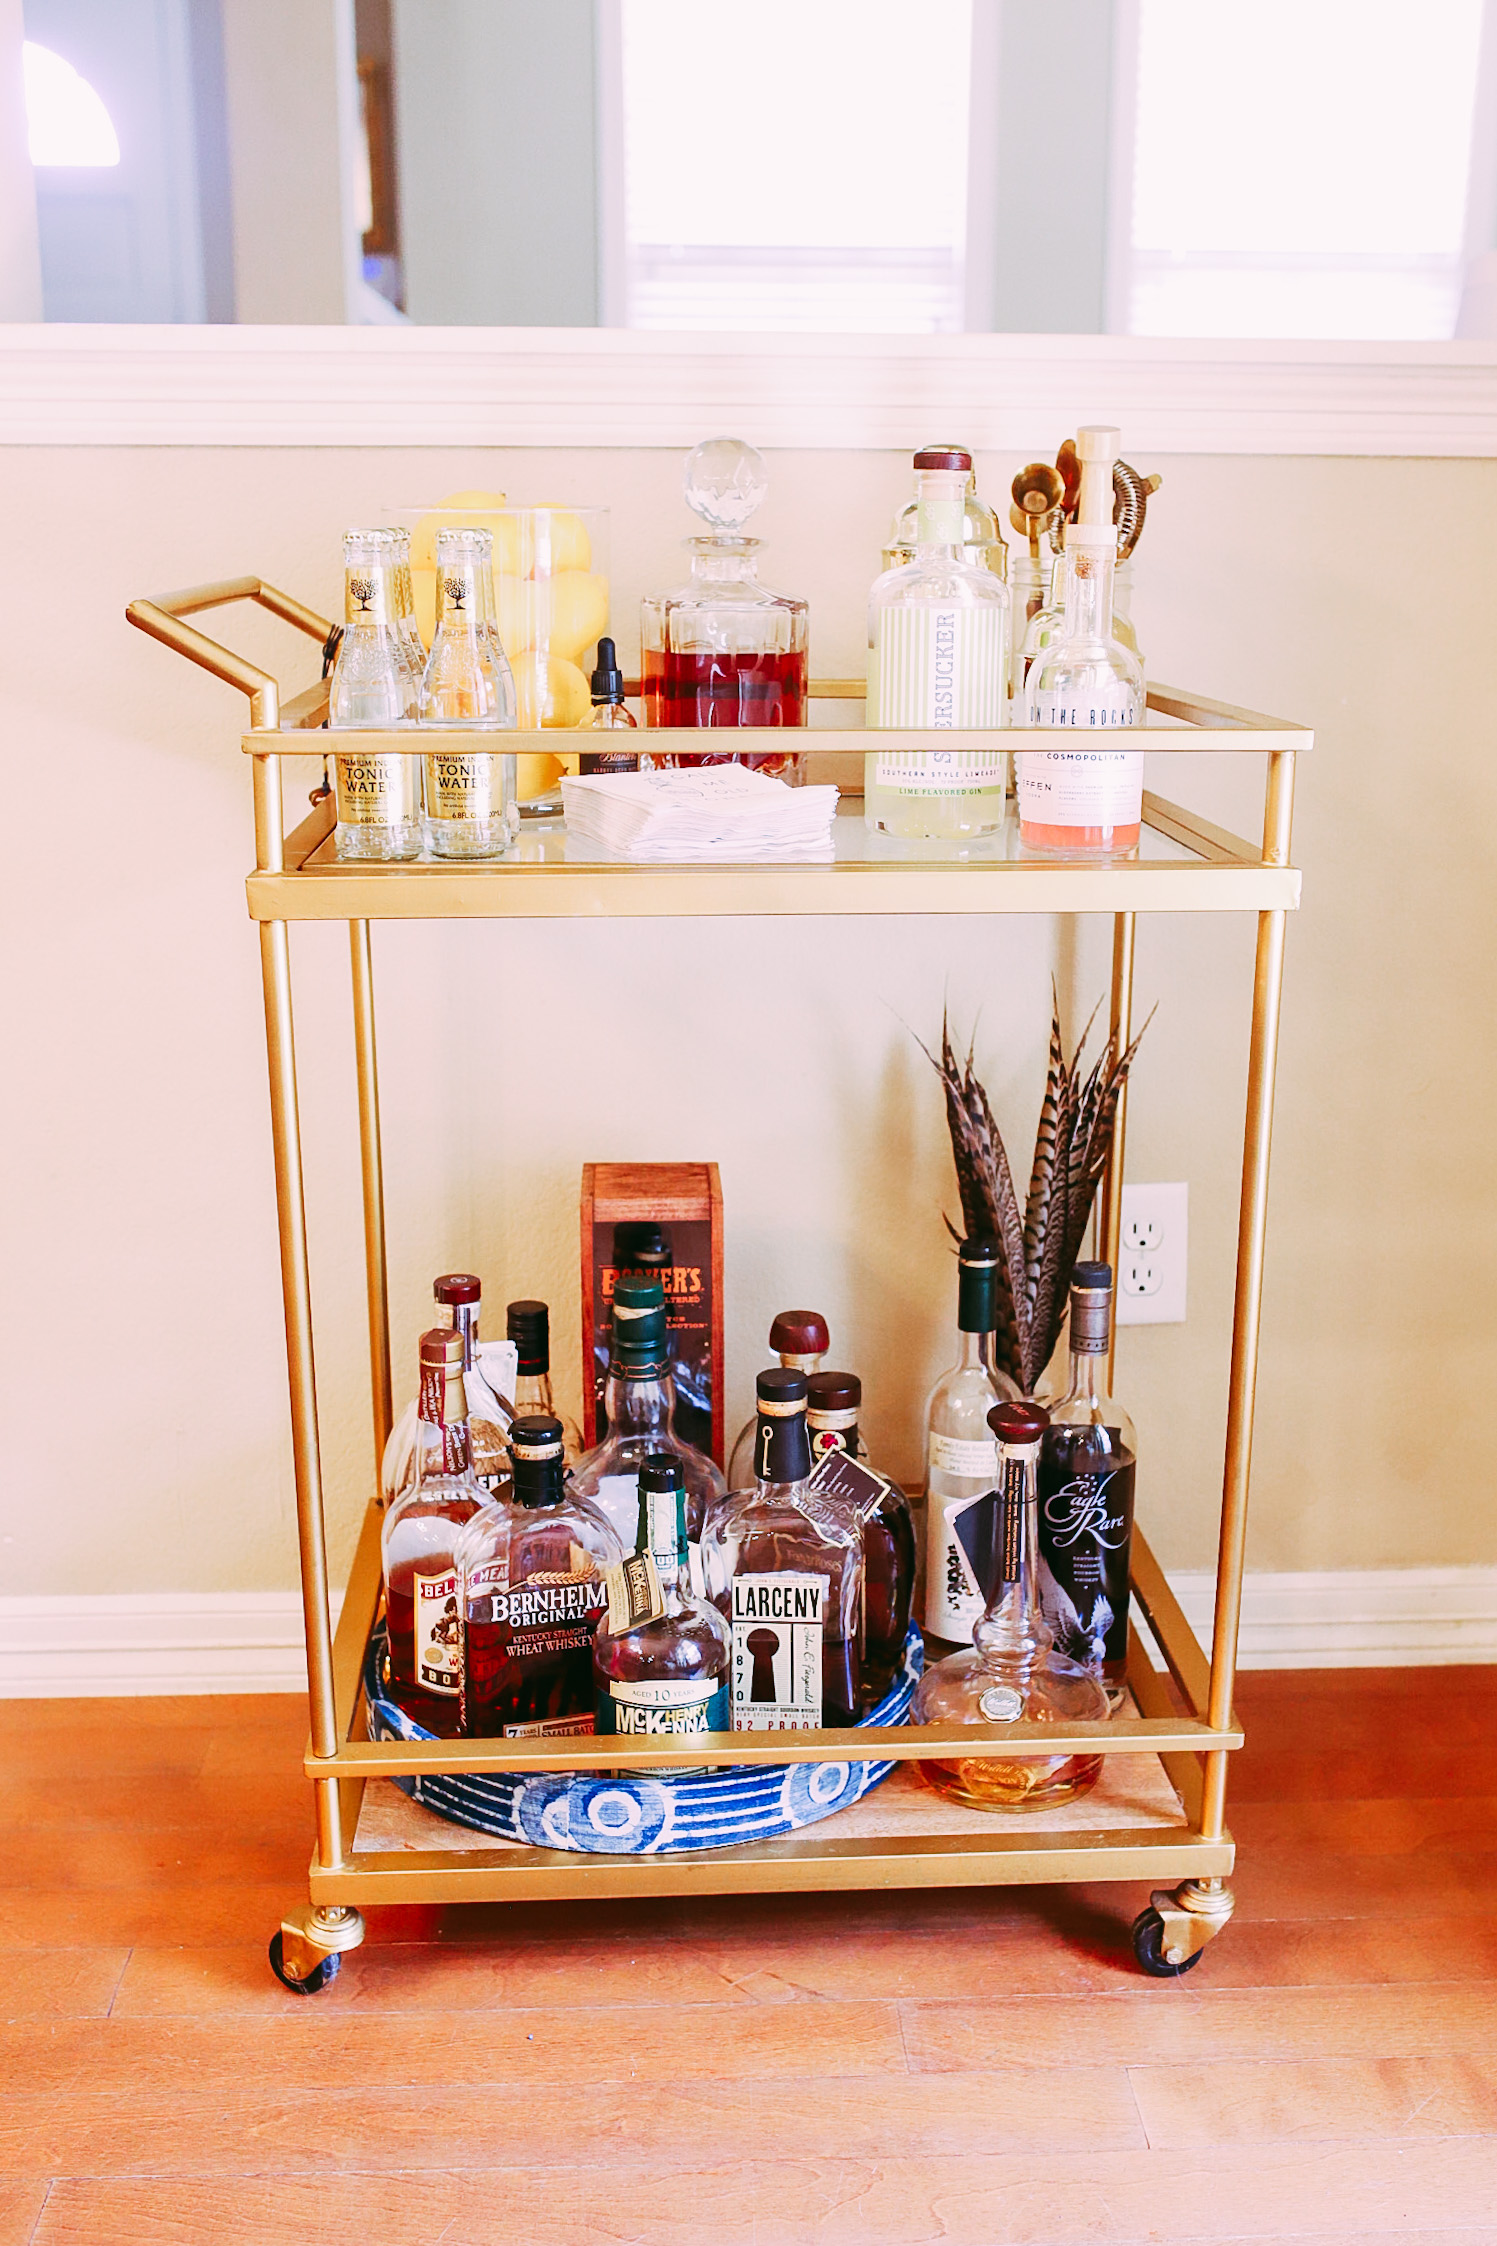 How to Style a Bar Cart